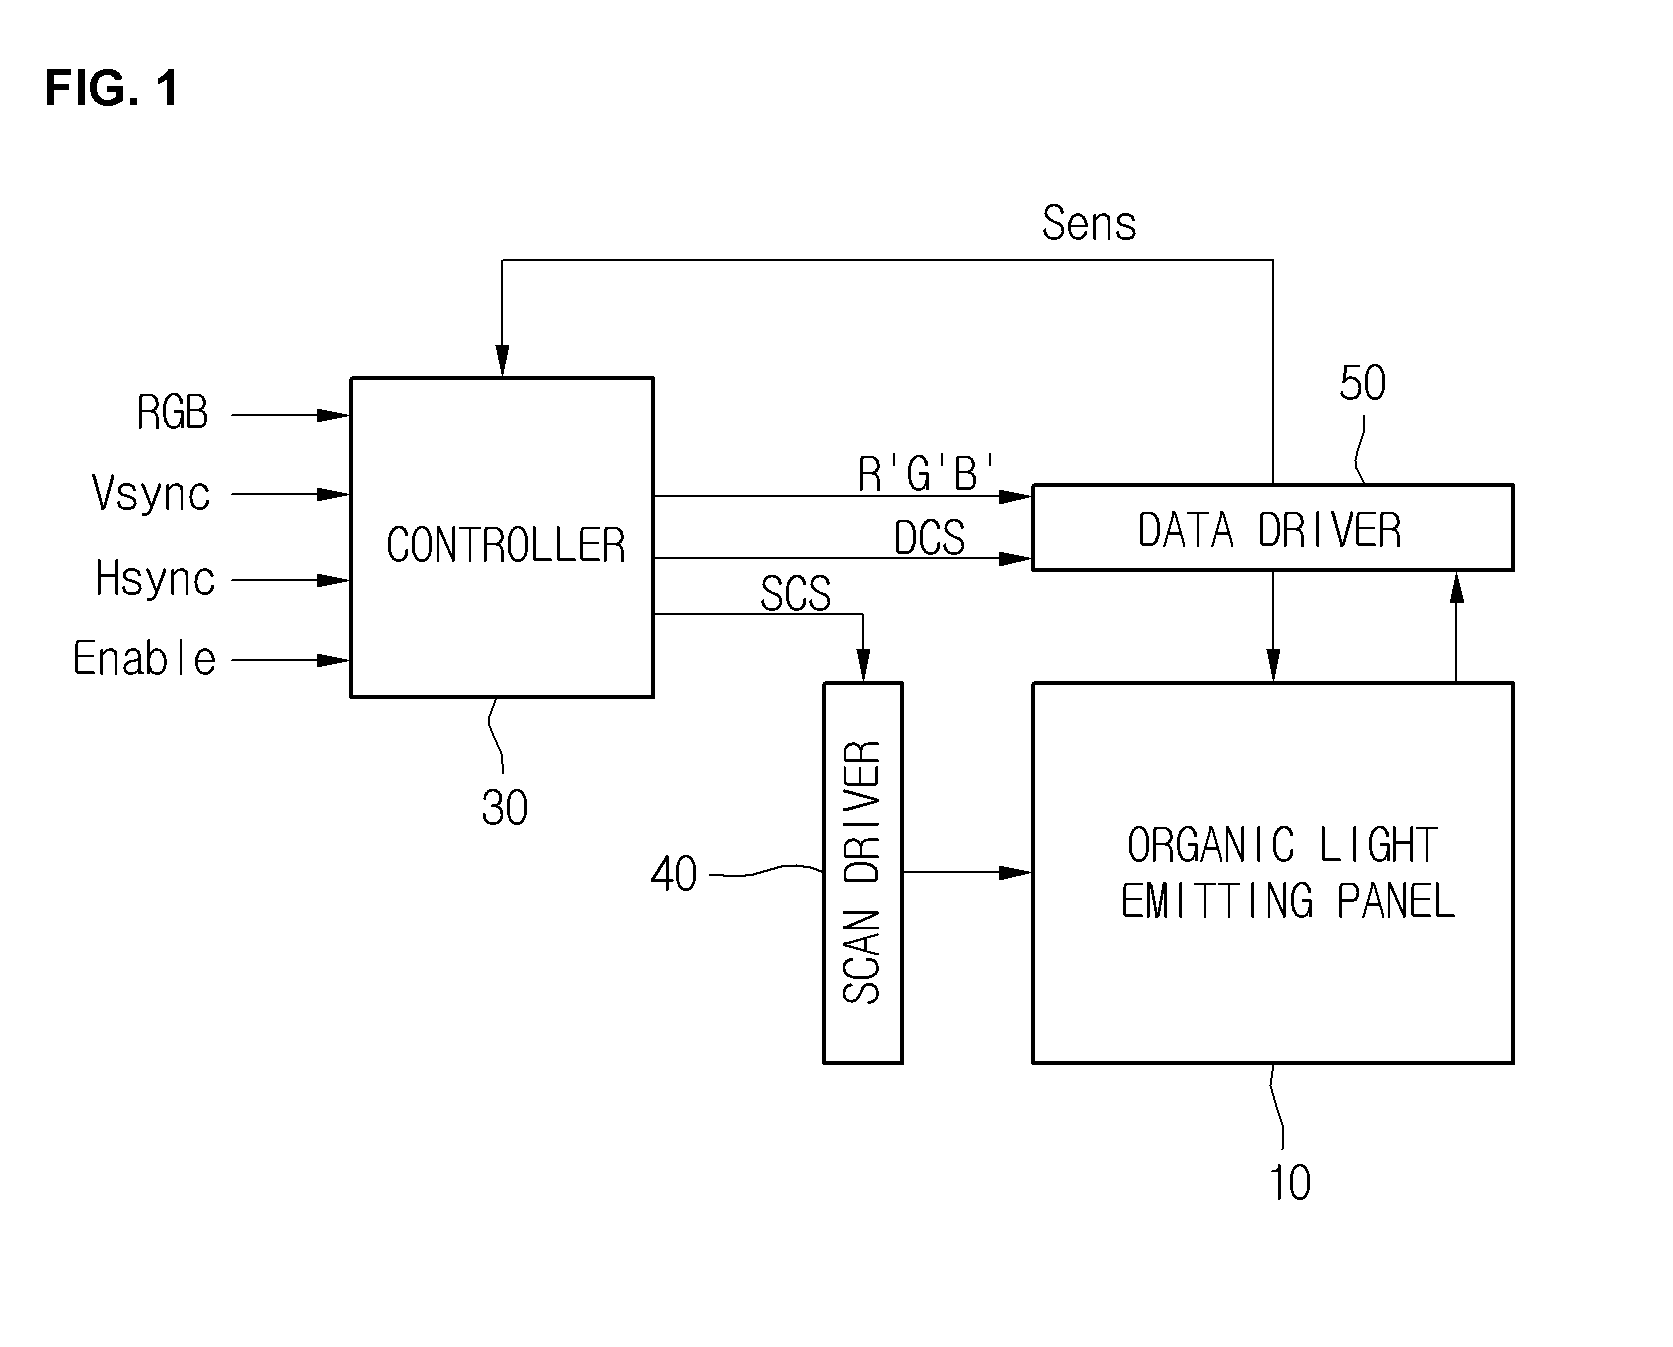 Organic light-emitting display device with data driver operable with signal line carrying both data signal and sensing signal